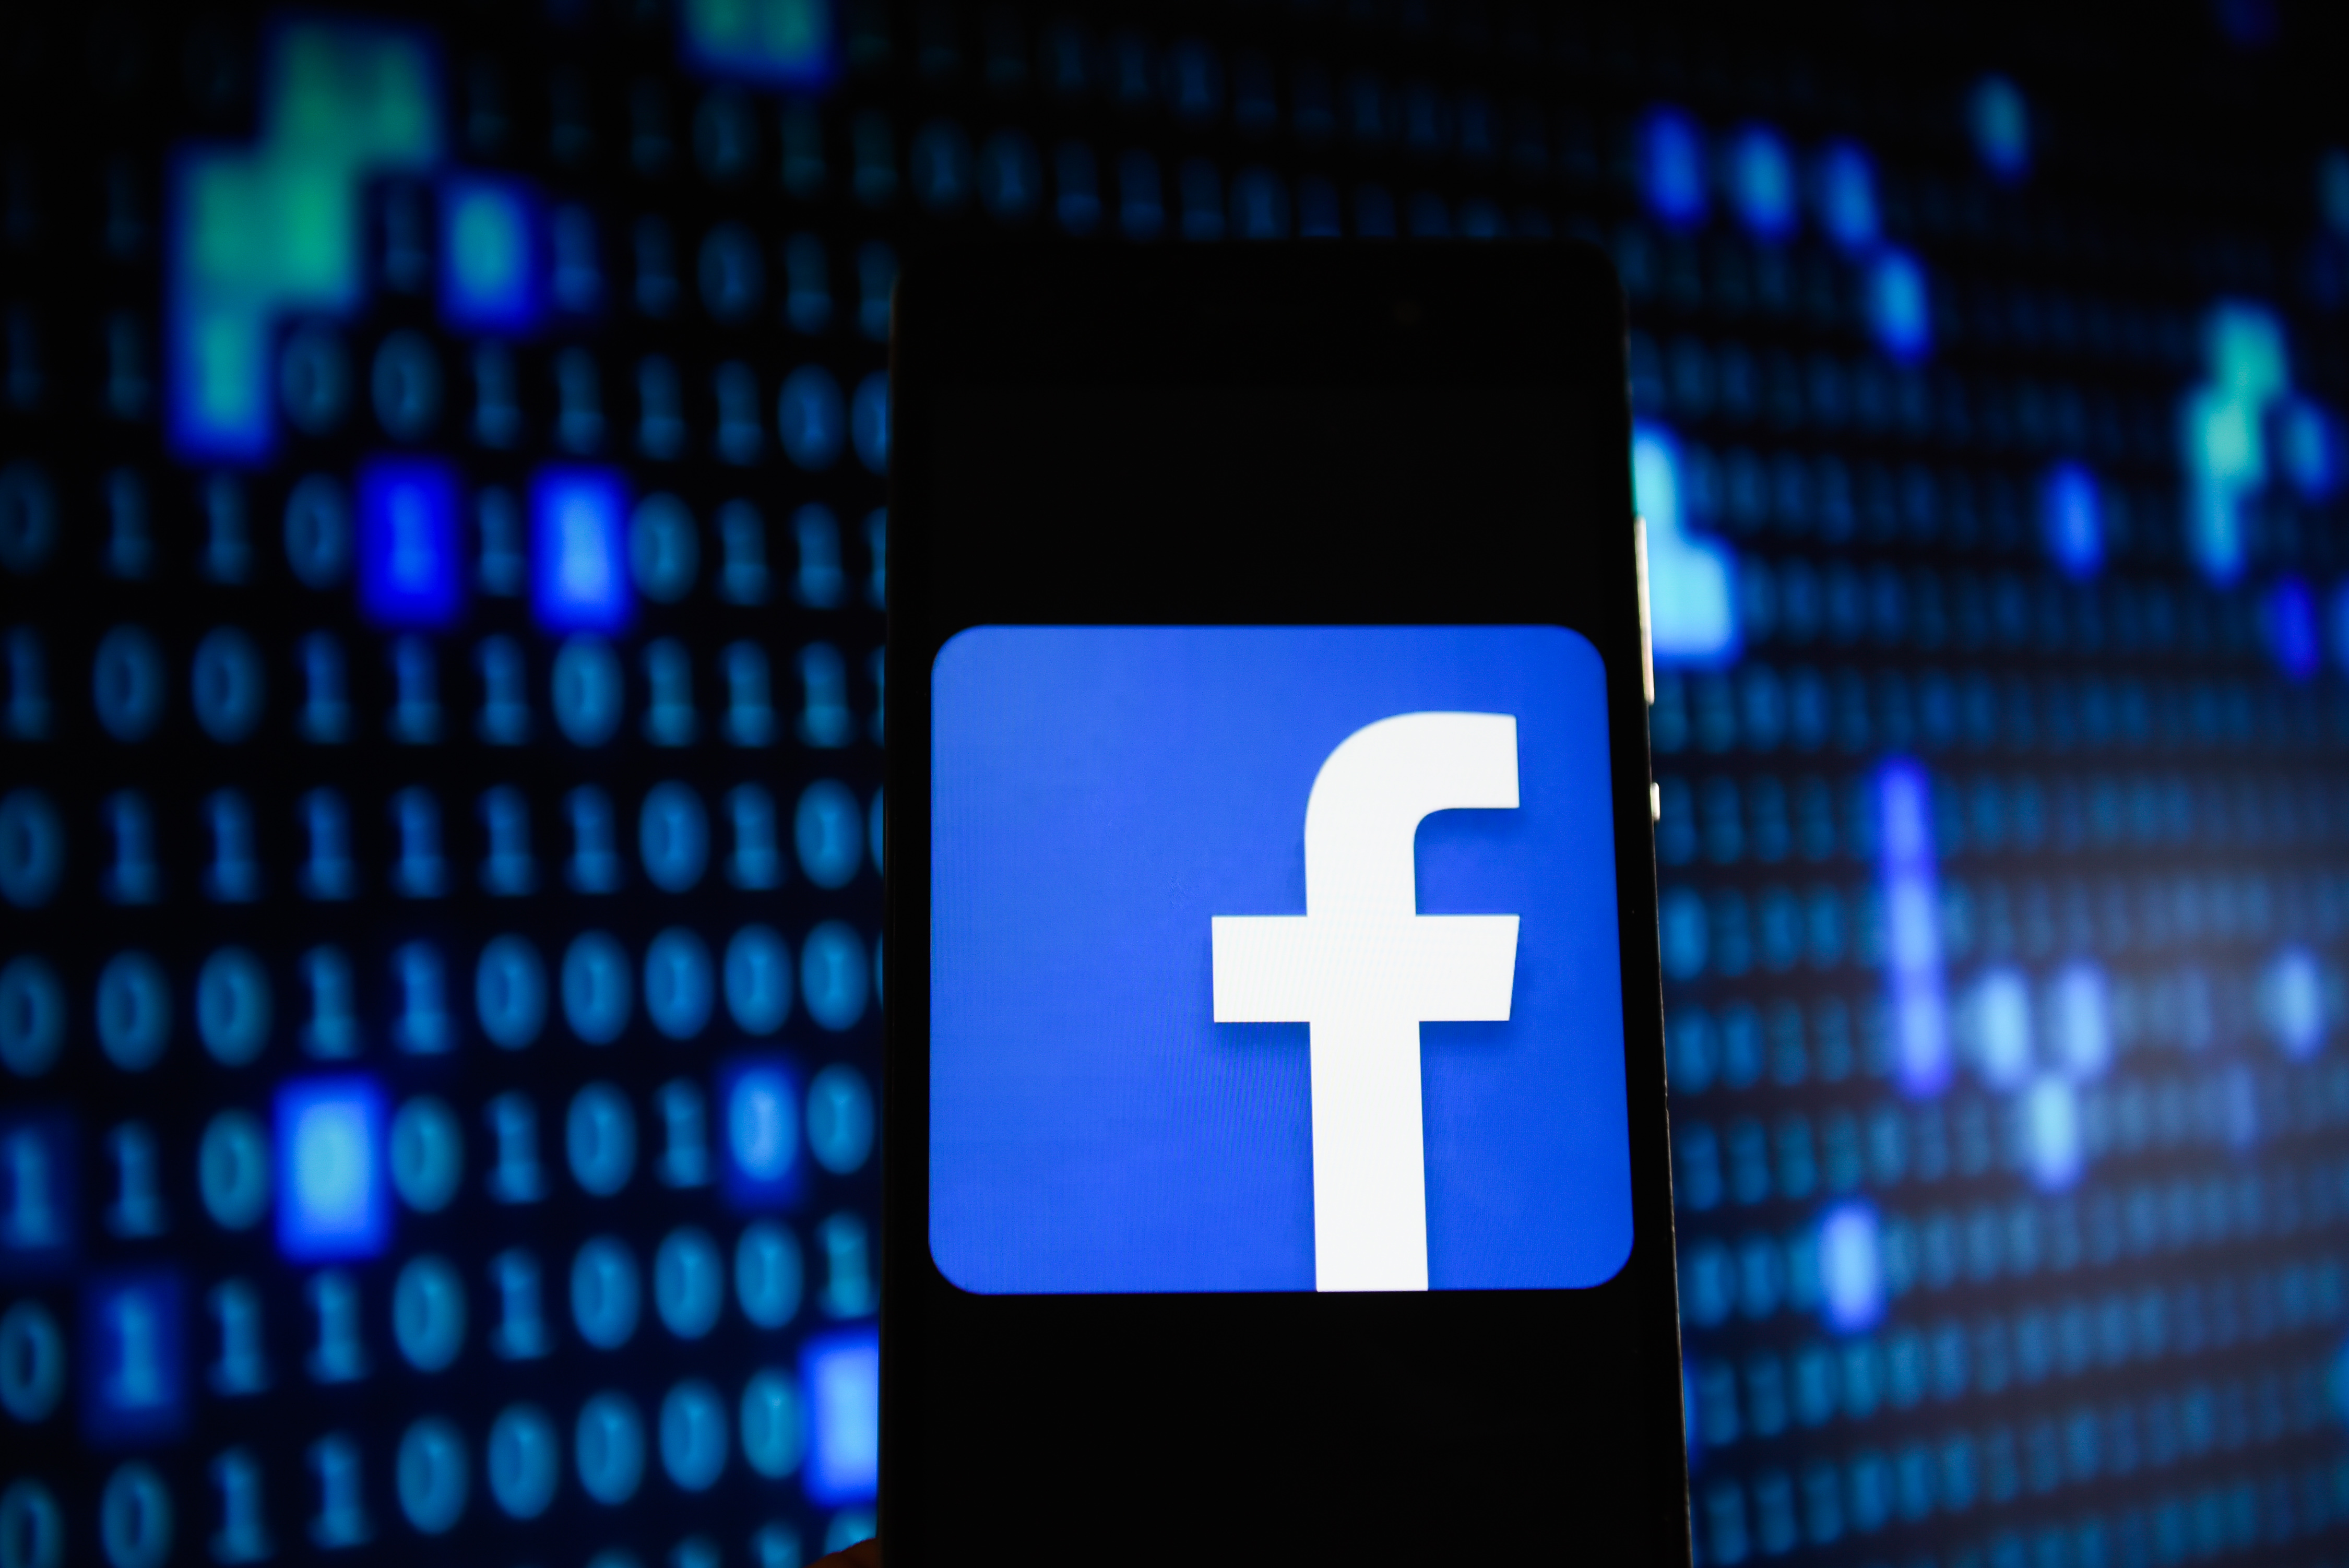 Facebook logo is seen in an Android mobile device in Krakow, Poland on July 25, 2018. (Omar Marques/SOPA Images/LightRocket via Getty Images)